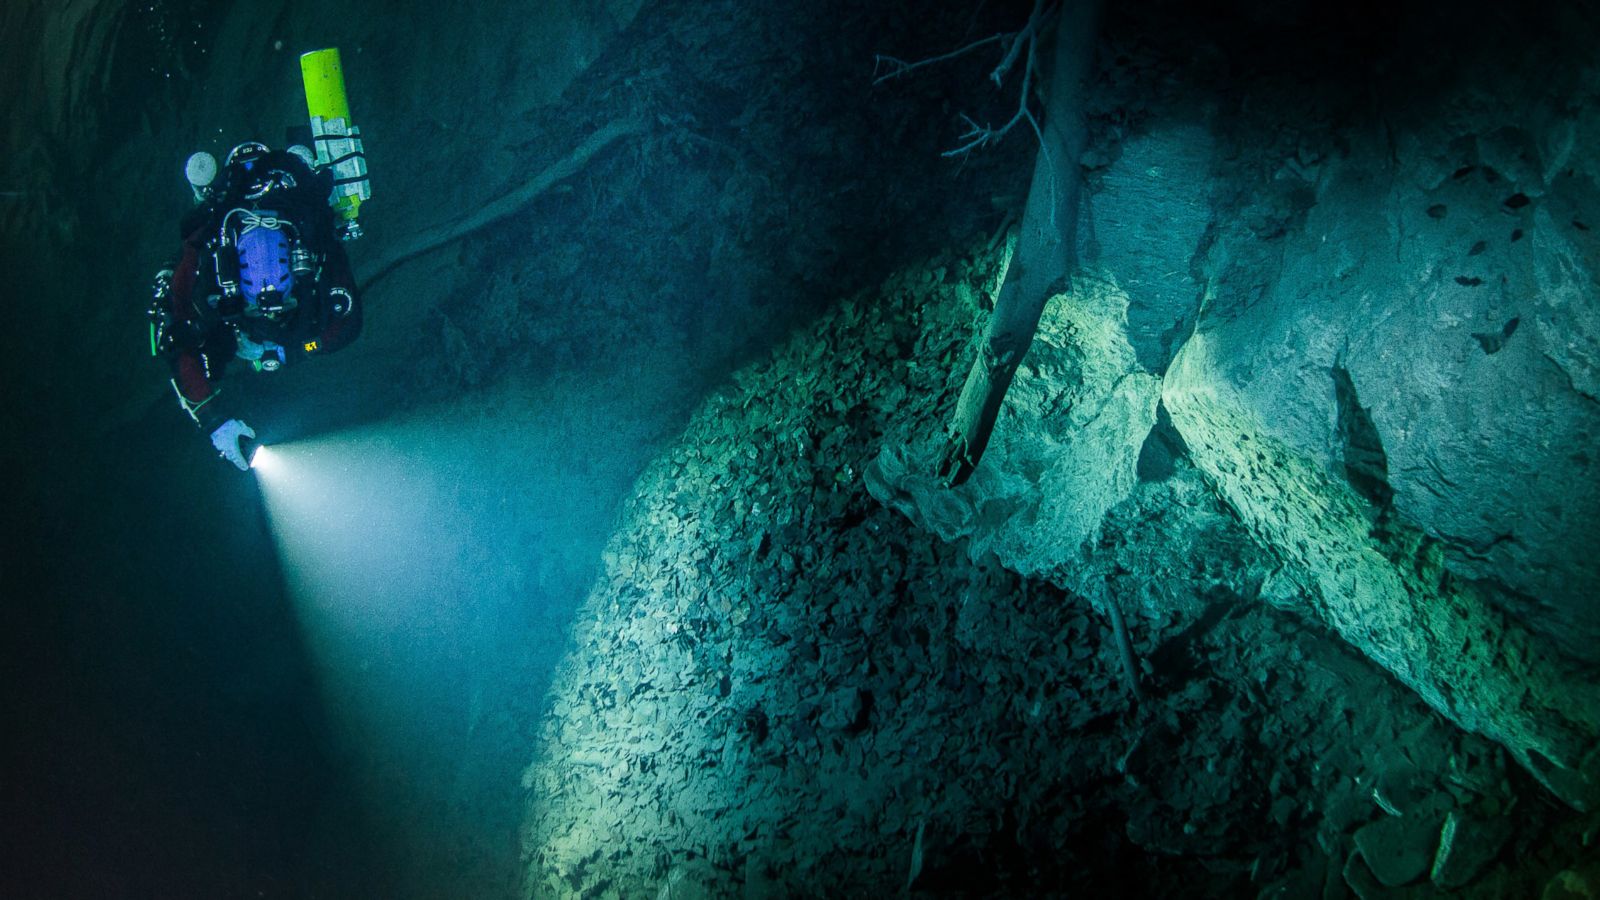 deepest underwater cave in the world